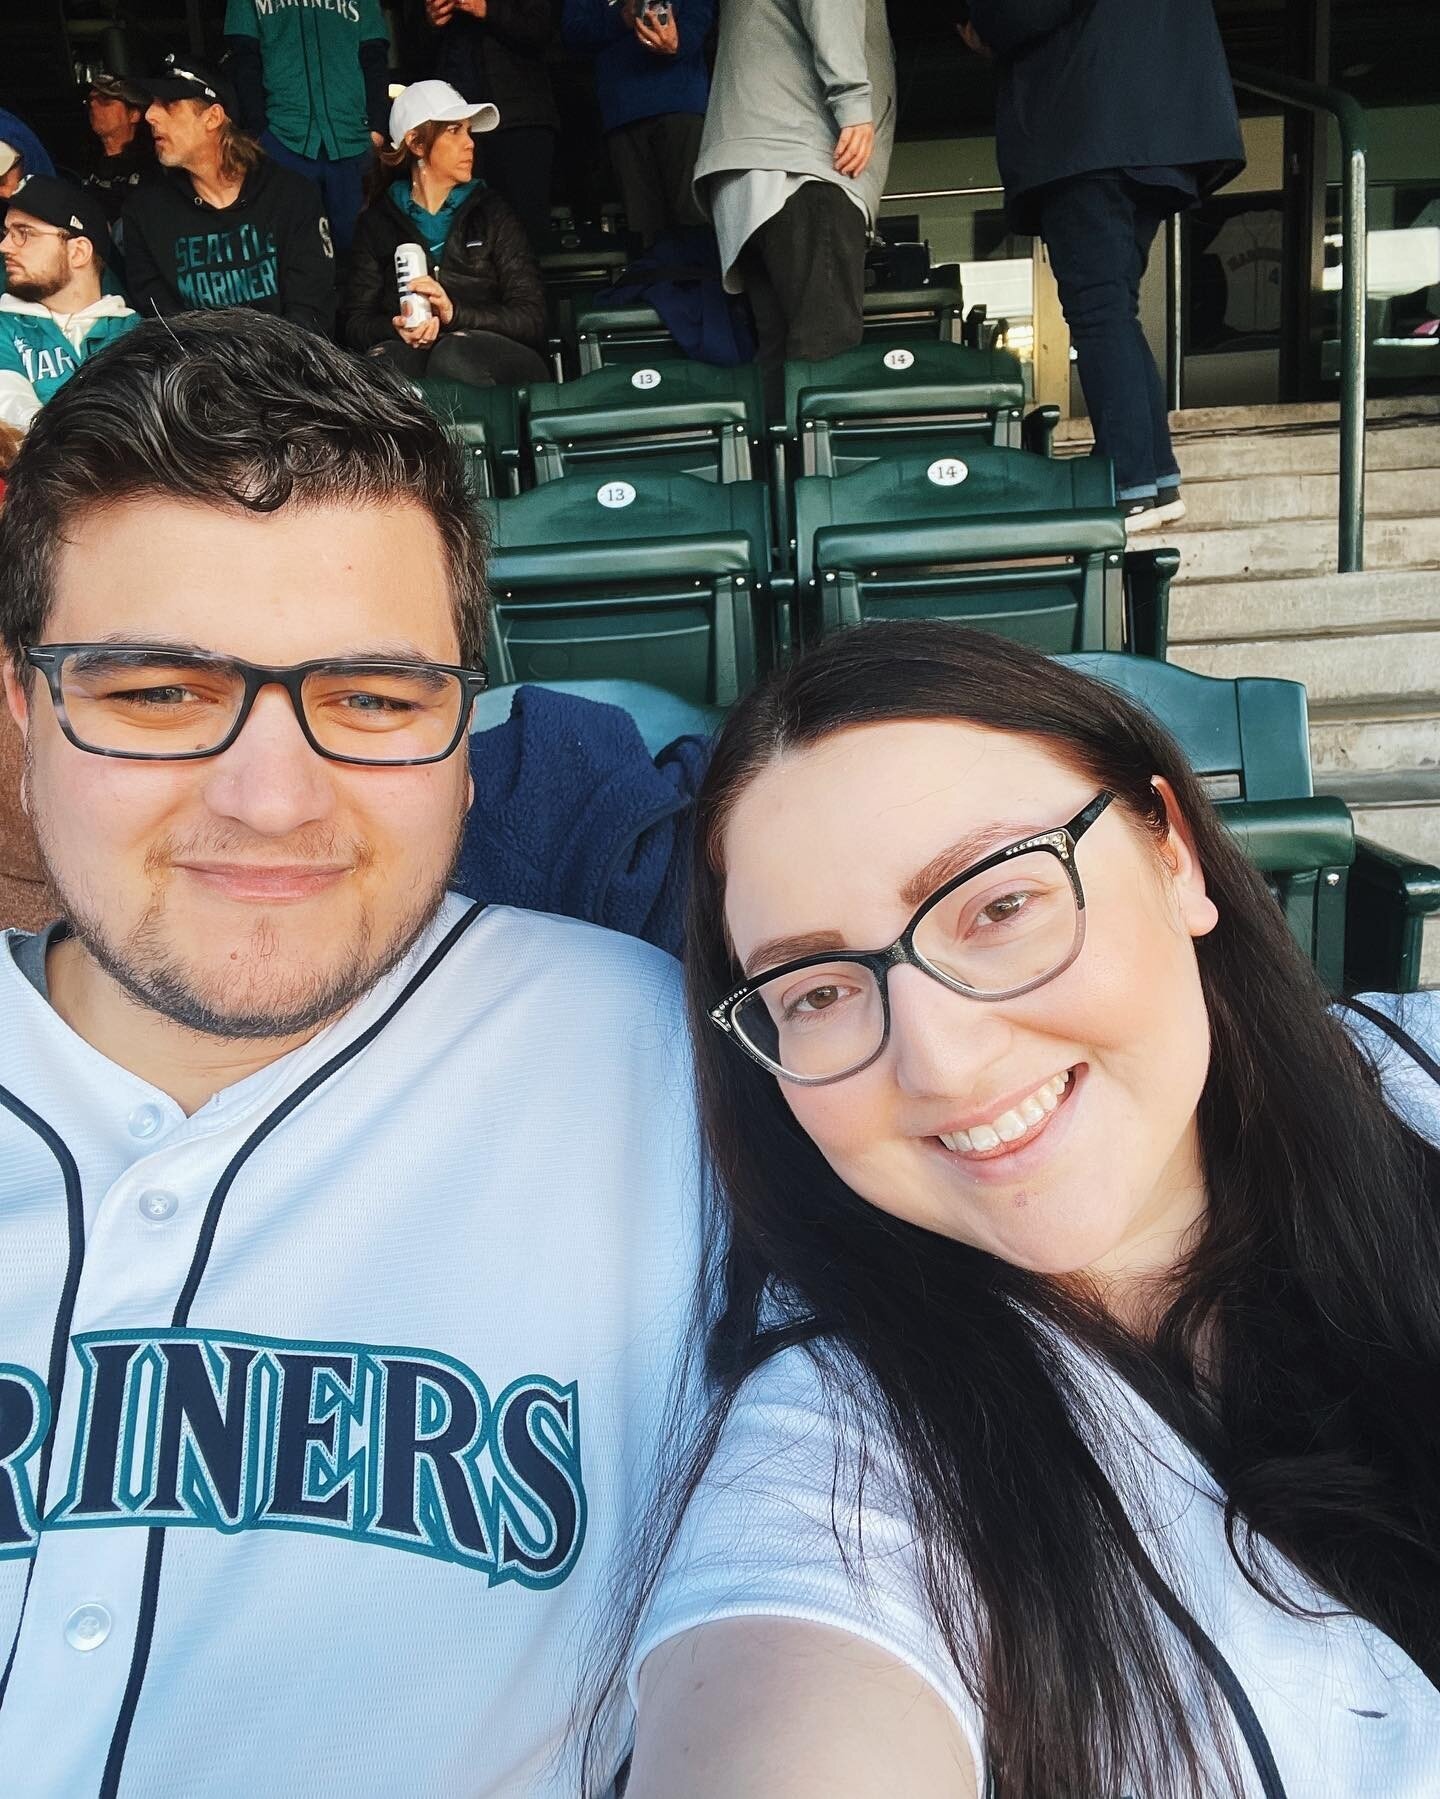 In honor of the MLB's Opening Day, I figured I'd throw it back with some of my favorite memories of being season ticket members last year! ⚾️🌭☀️⁠ ⁠
⁠
My husband and I decided to pull the trigger and become members for our 10th anniversary. The M's h